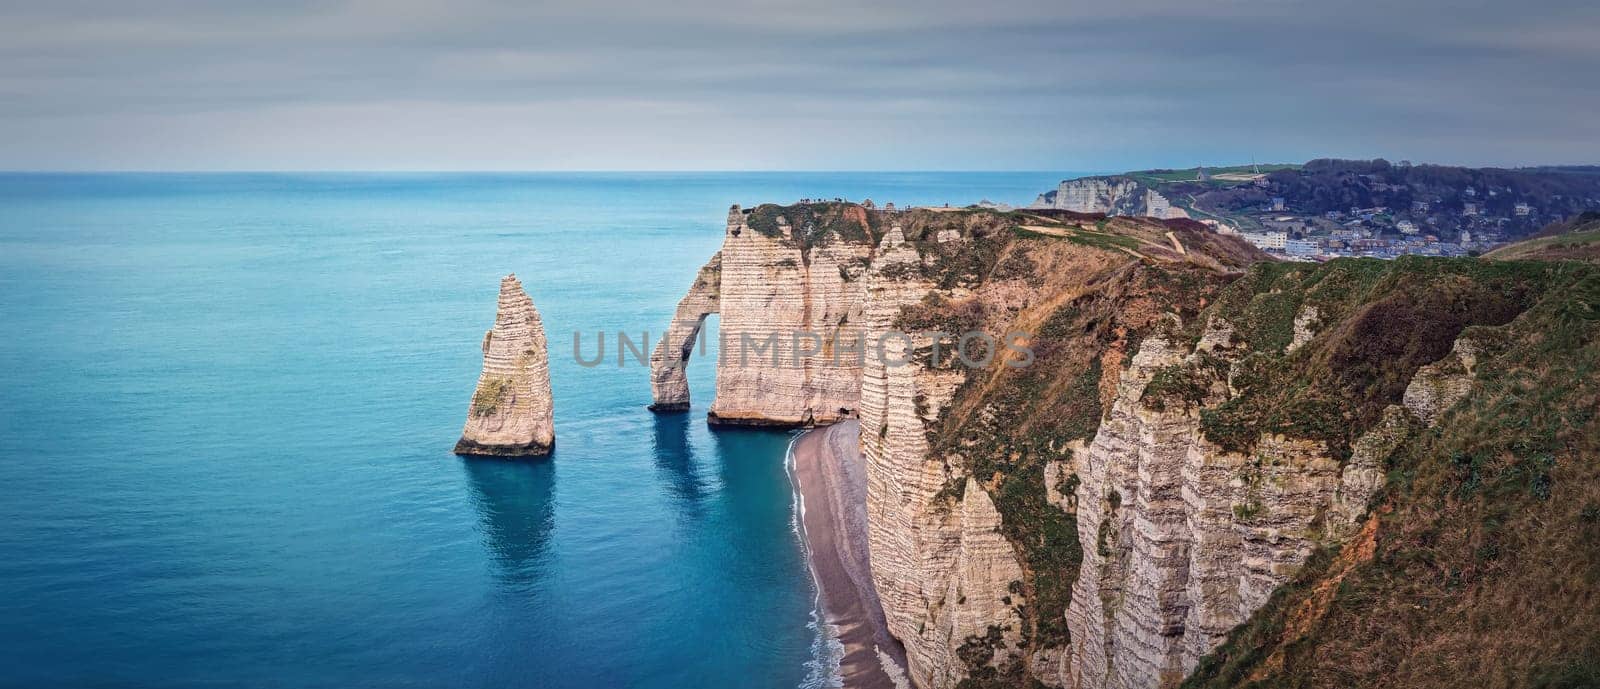 Panoramic view to the famous rock Aiguille of Etretat in Normandy, France. Limestone cliffs Falaise d'Aval washed by La Manche channel waters. Beautiful coastline panorama by psychoshadow